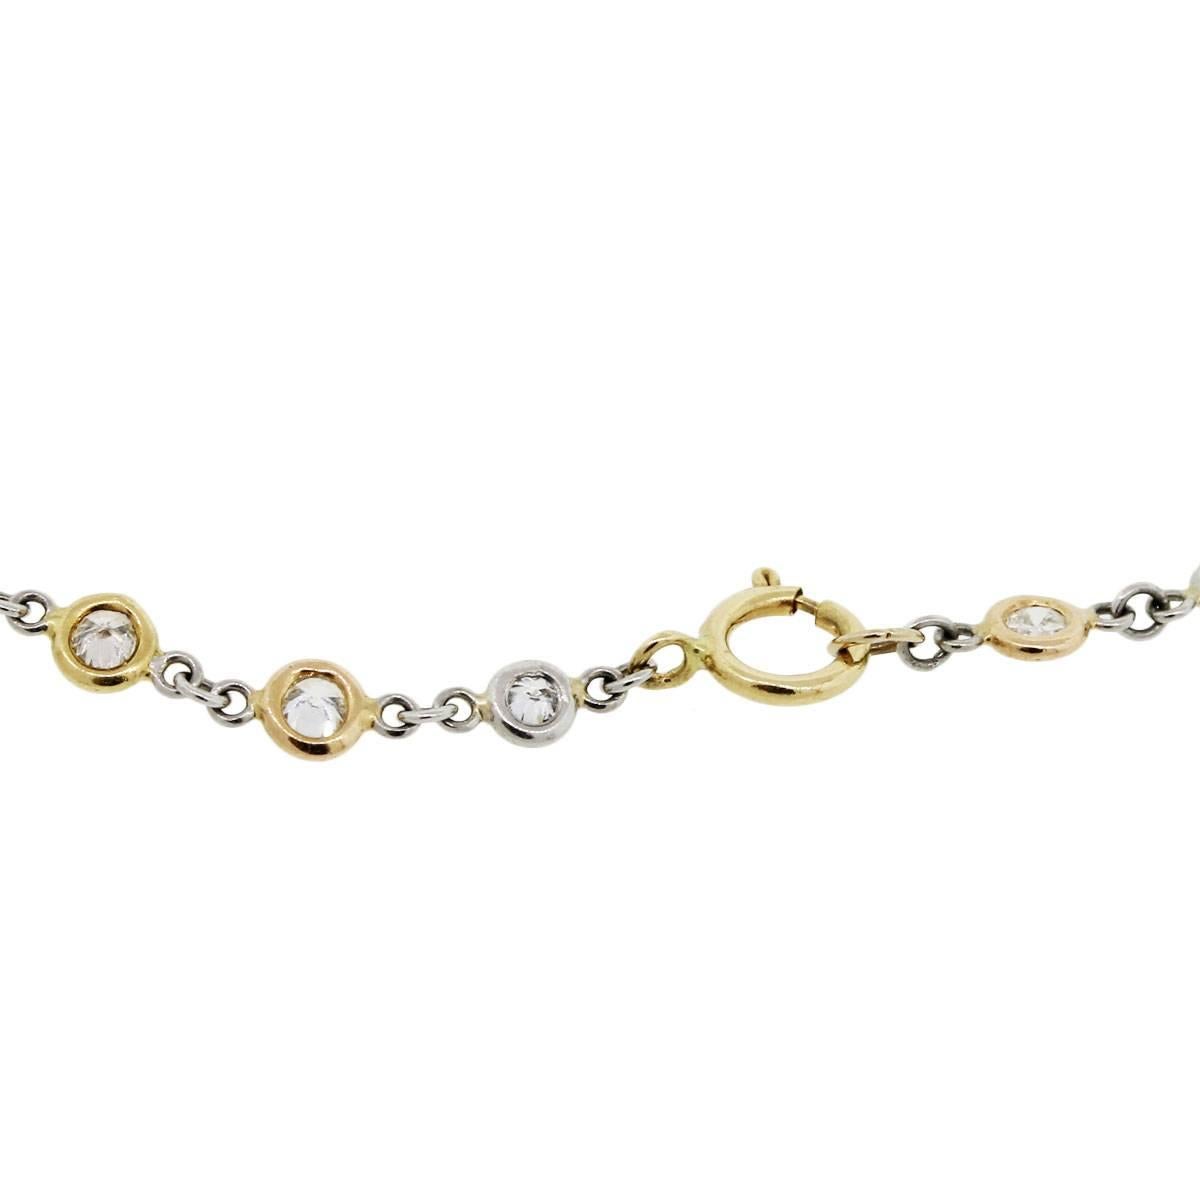 Material: Platinum, 18k rose gold and 18k yellow gold
Diamond Details: Approximately 4.31ctw of round brilliant diamonds. Diamonds are H/I in color and SI in clarity
Necklace Measurements: 23.25″
Clasp: Spring ring clasp
Total Weight: 9.3g